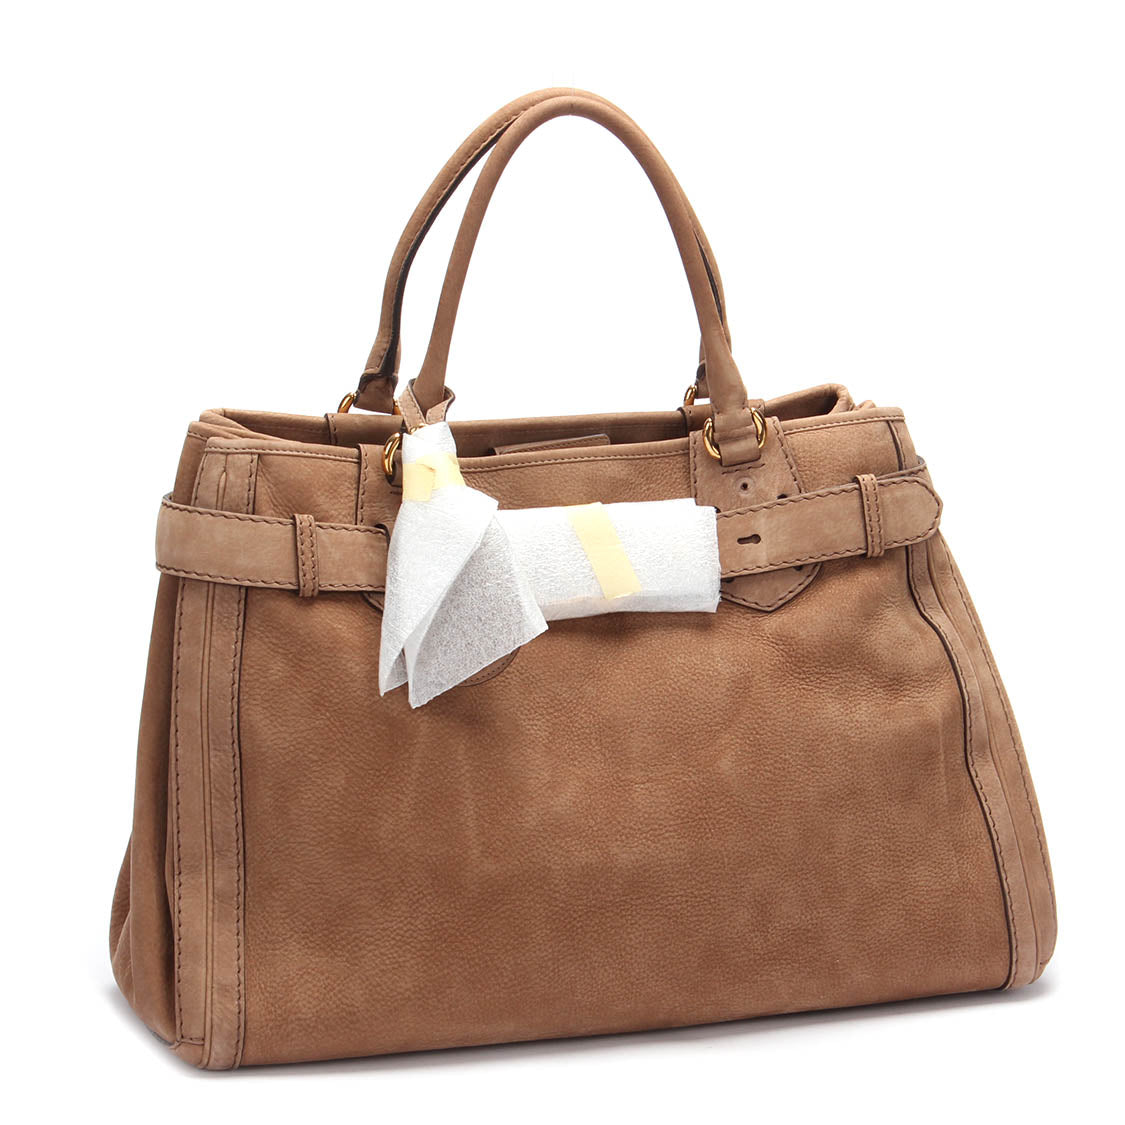 Suede Leather Running Tote Bag 247179